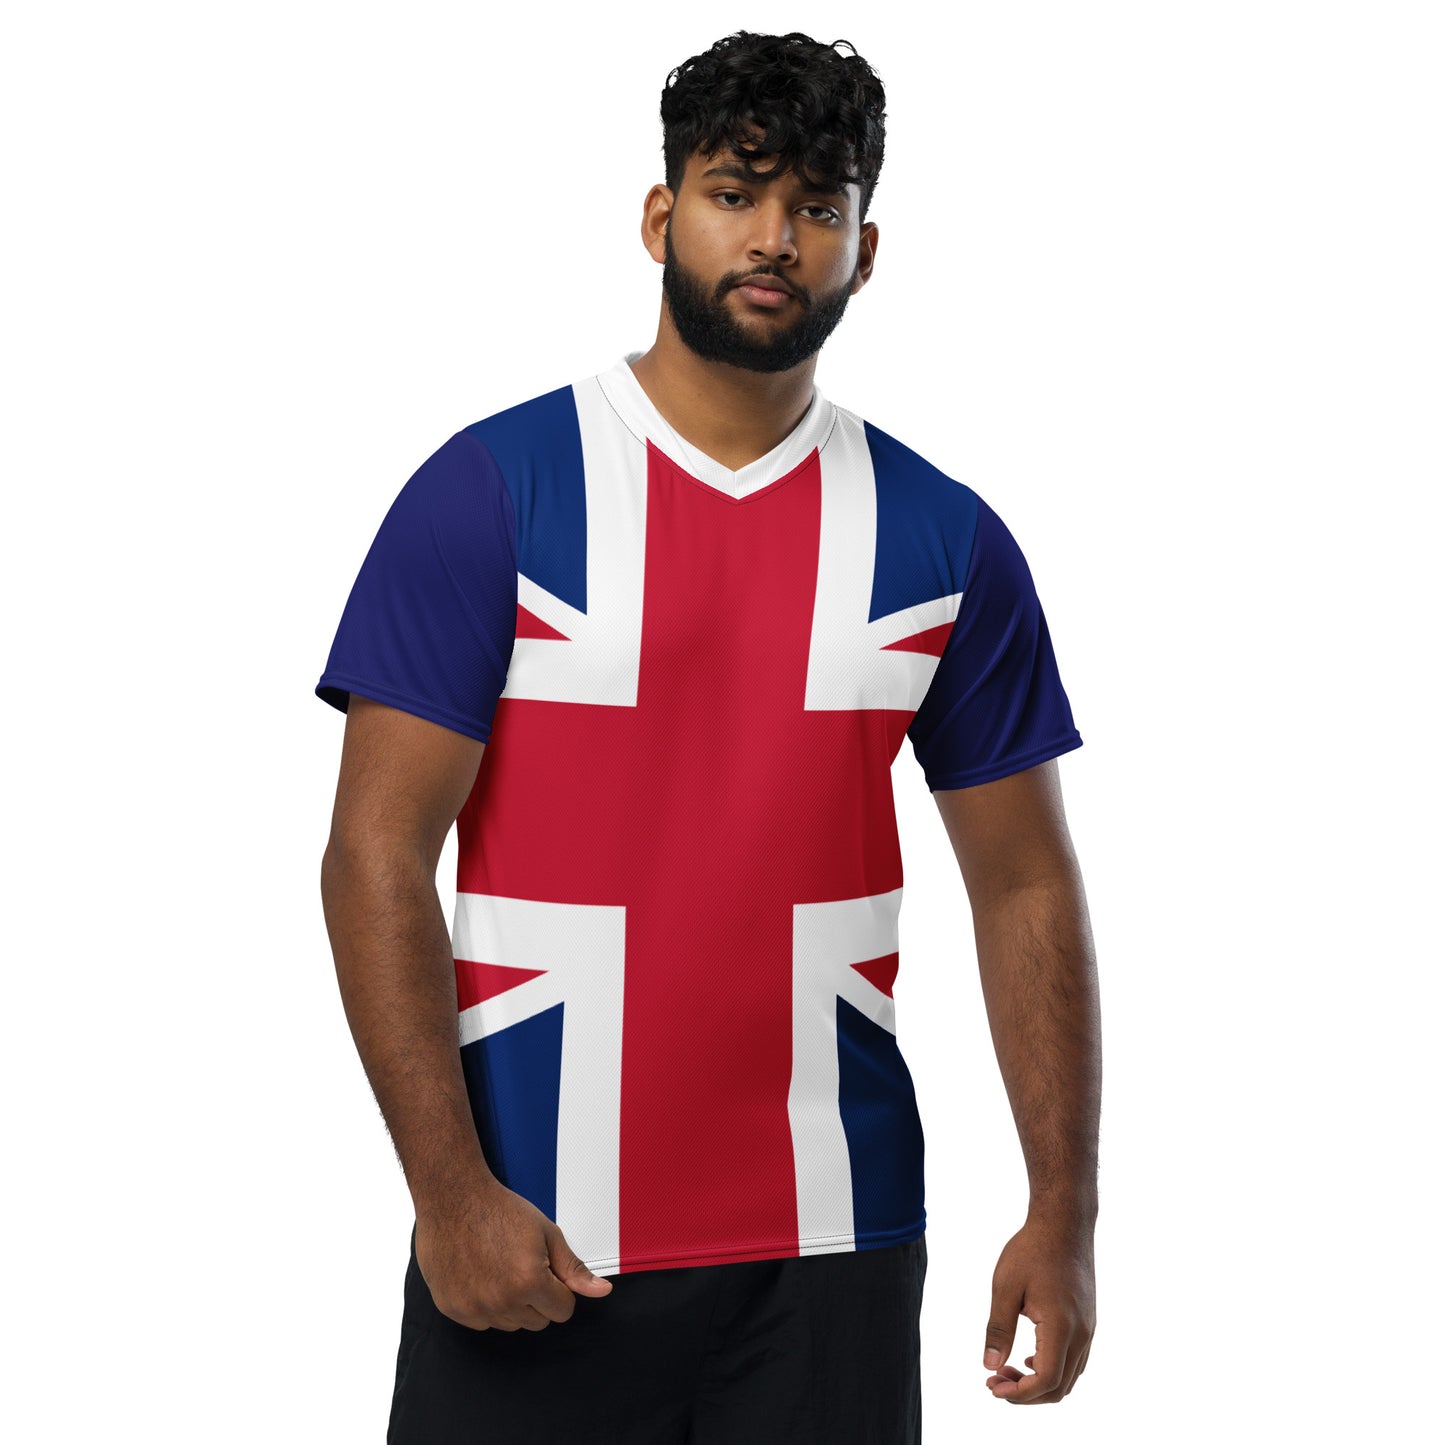 Support Team GB and represent the UK in this jersey